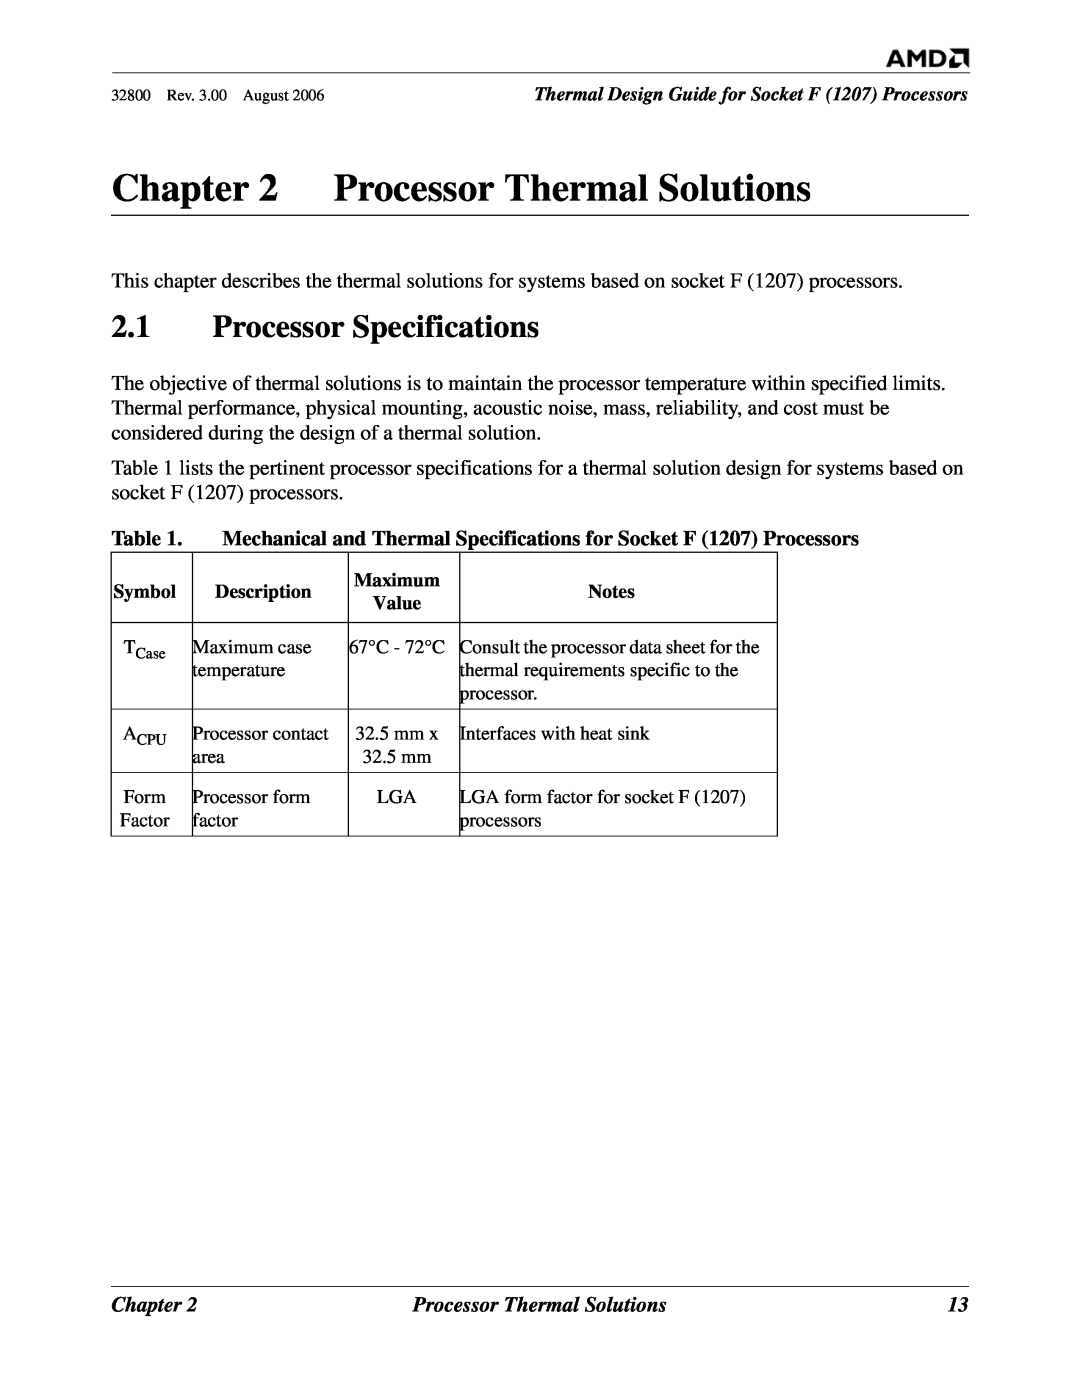 AMD 1207 manual Processor Thermal Solutions, Processor Specifications, Chapter 